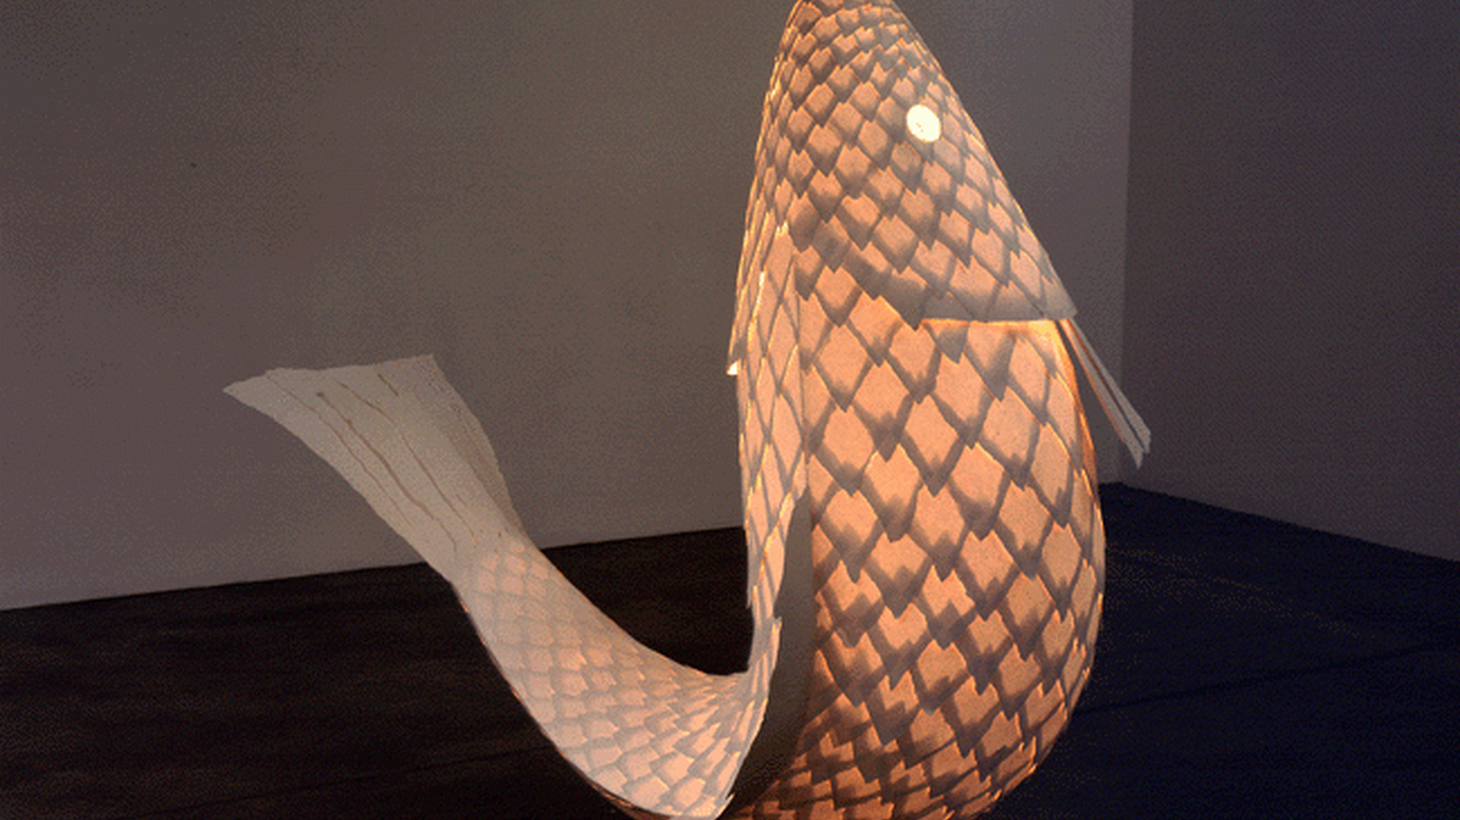 Frank Gehry Still Glows: Revisits “Available Light” and Fish Lamps